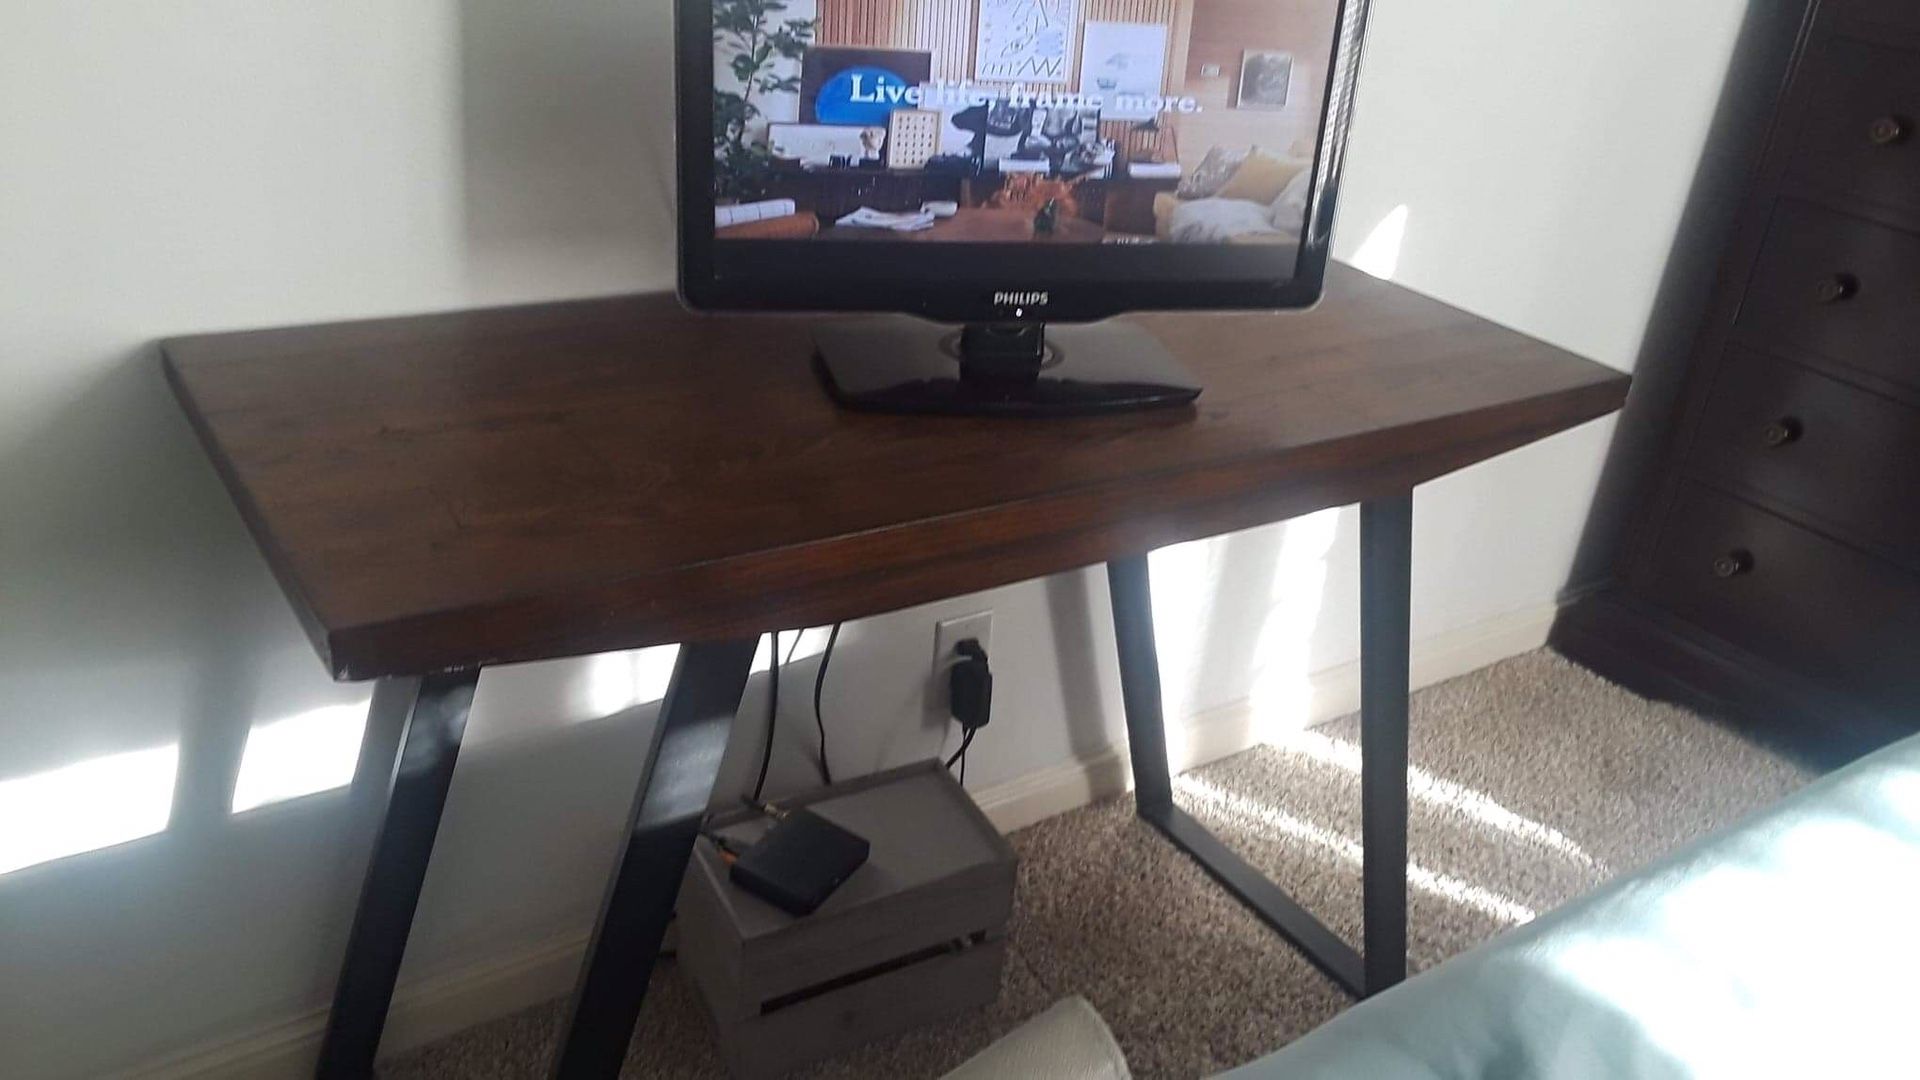 21” Panasonic TV with remote and Very Nice Wooden Table 44”x19”